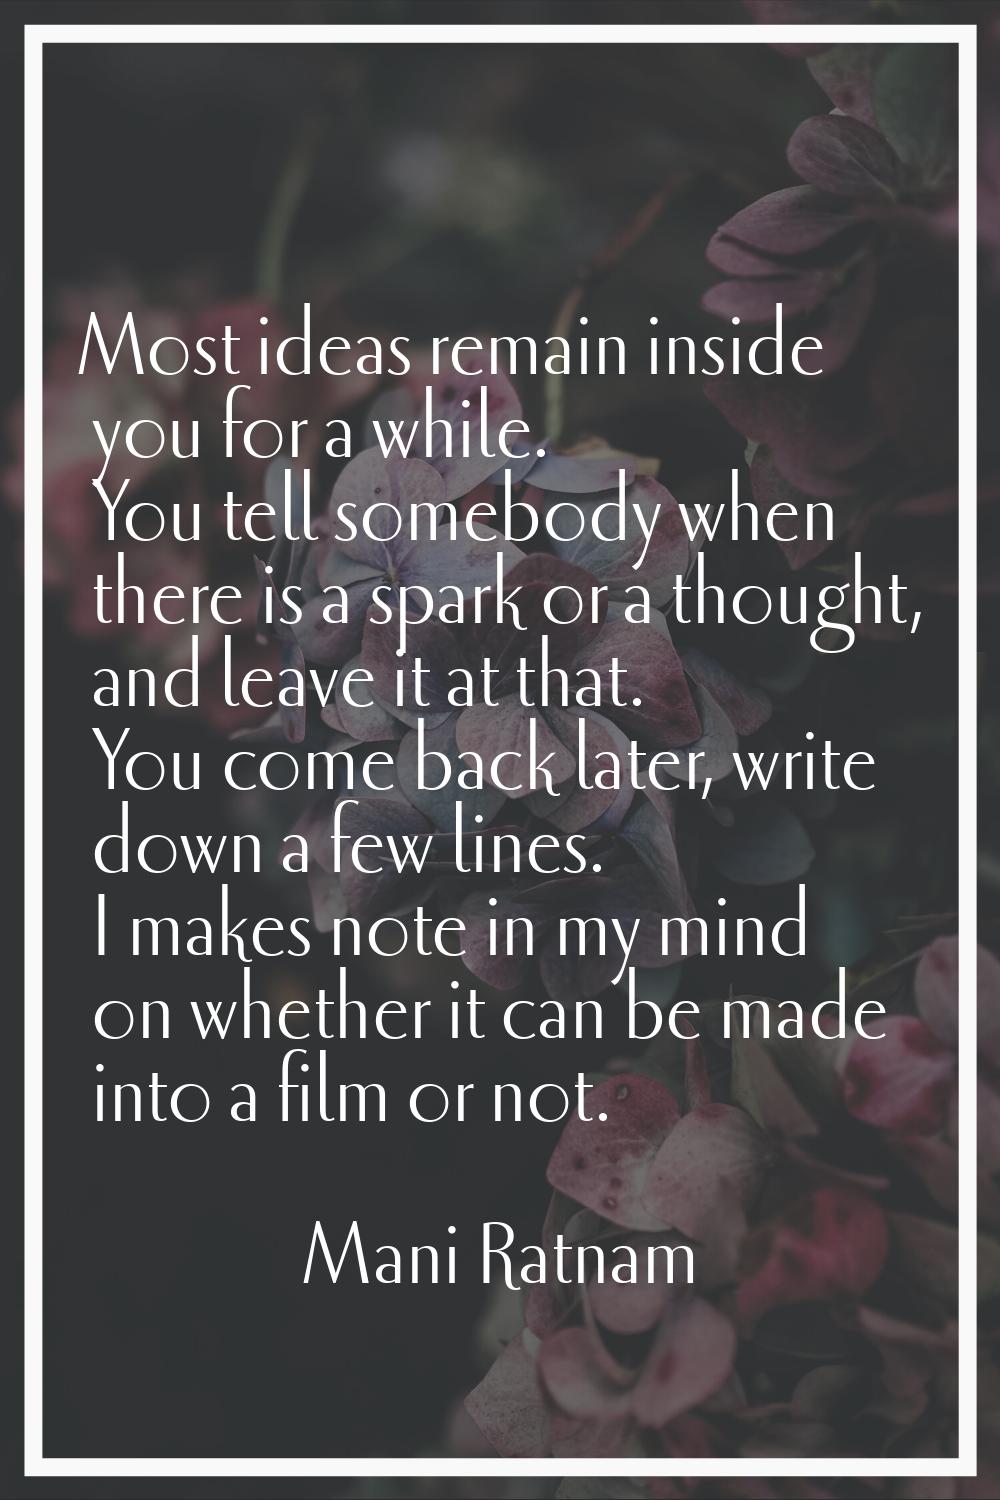 Most ideas remain inside you for a while. You tell somebody when there is a spark or a thought, and